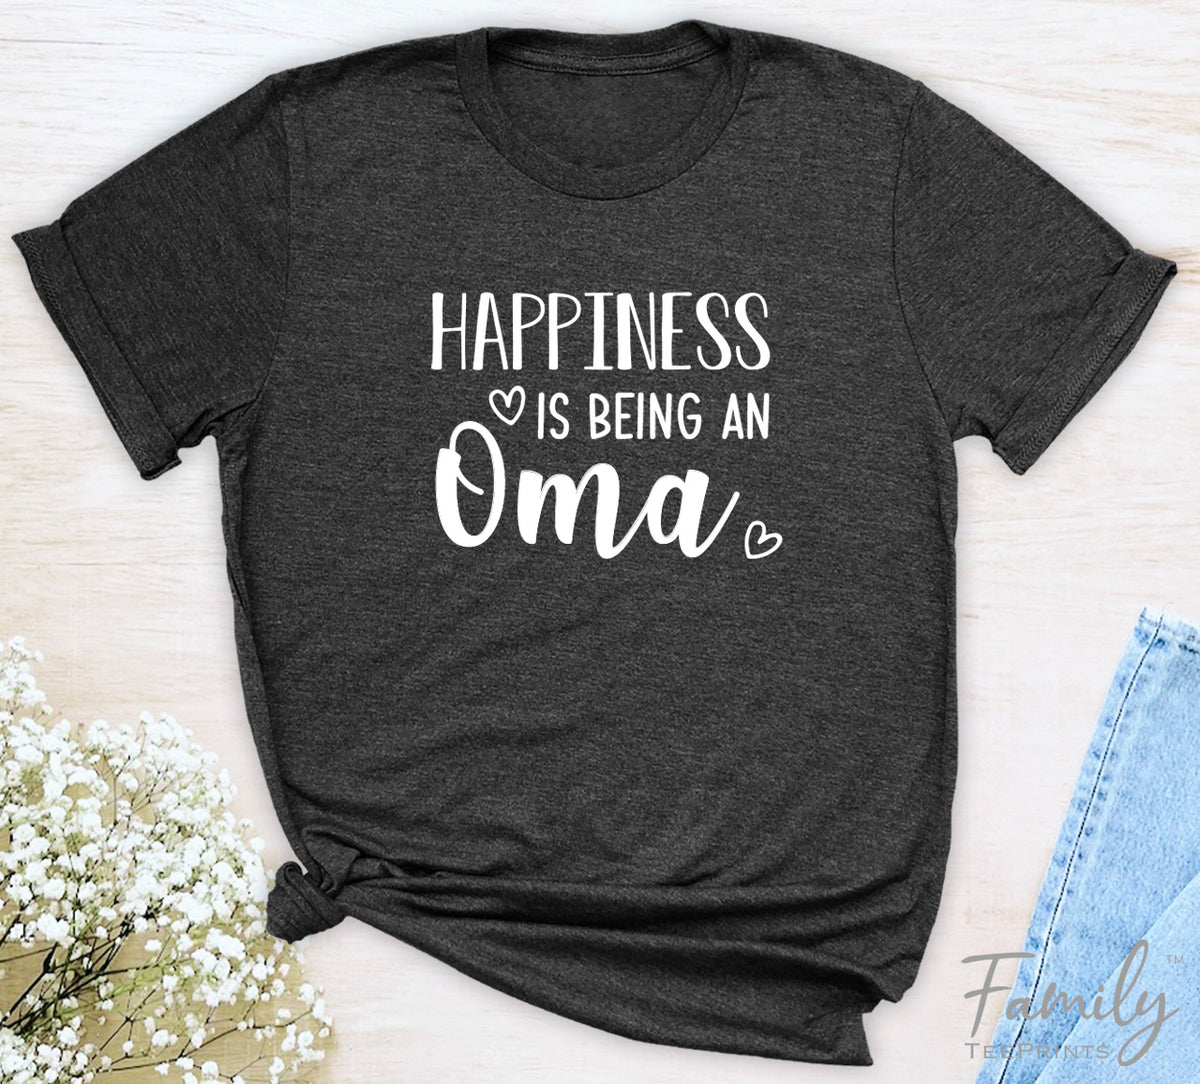 Happiness Is Being An Oma - Unisex T-shirt - Oma Shirt - Gift For Oma - familyteeprints